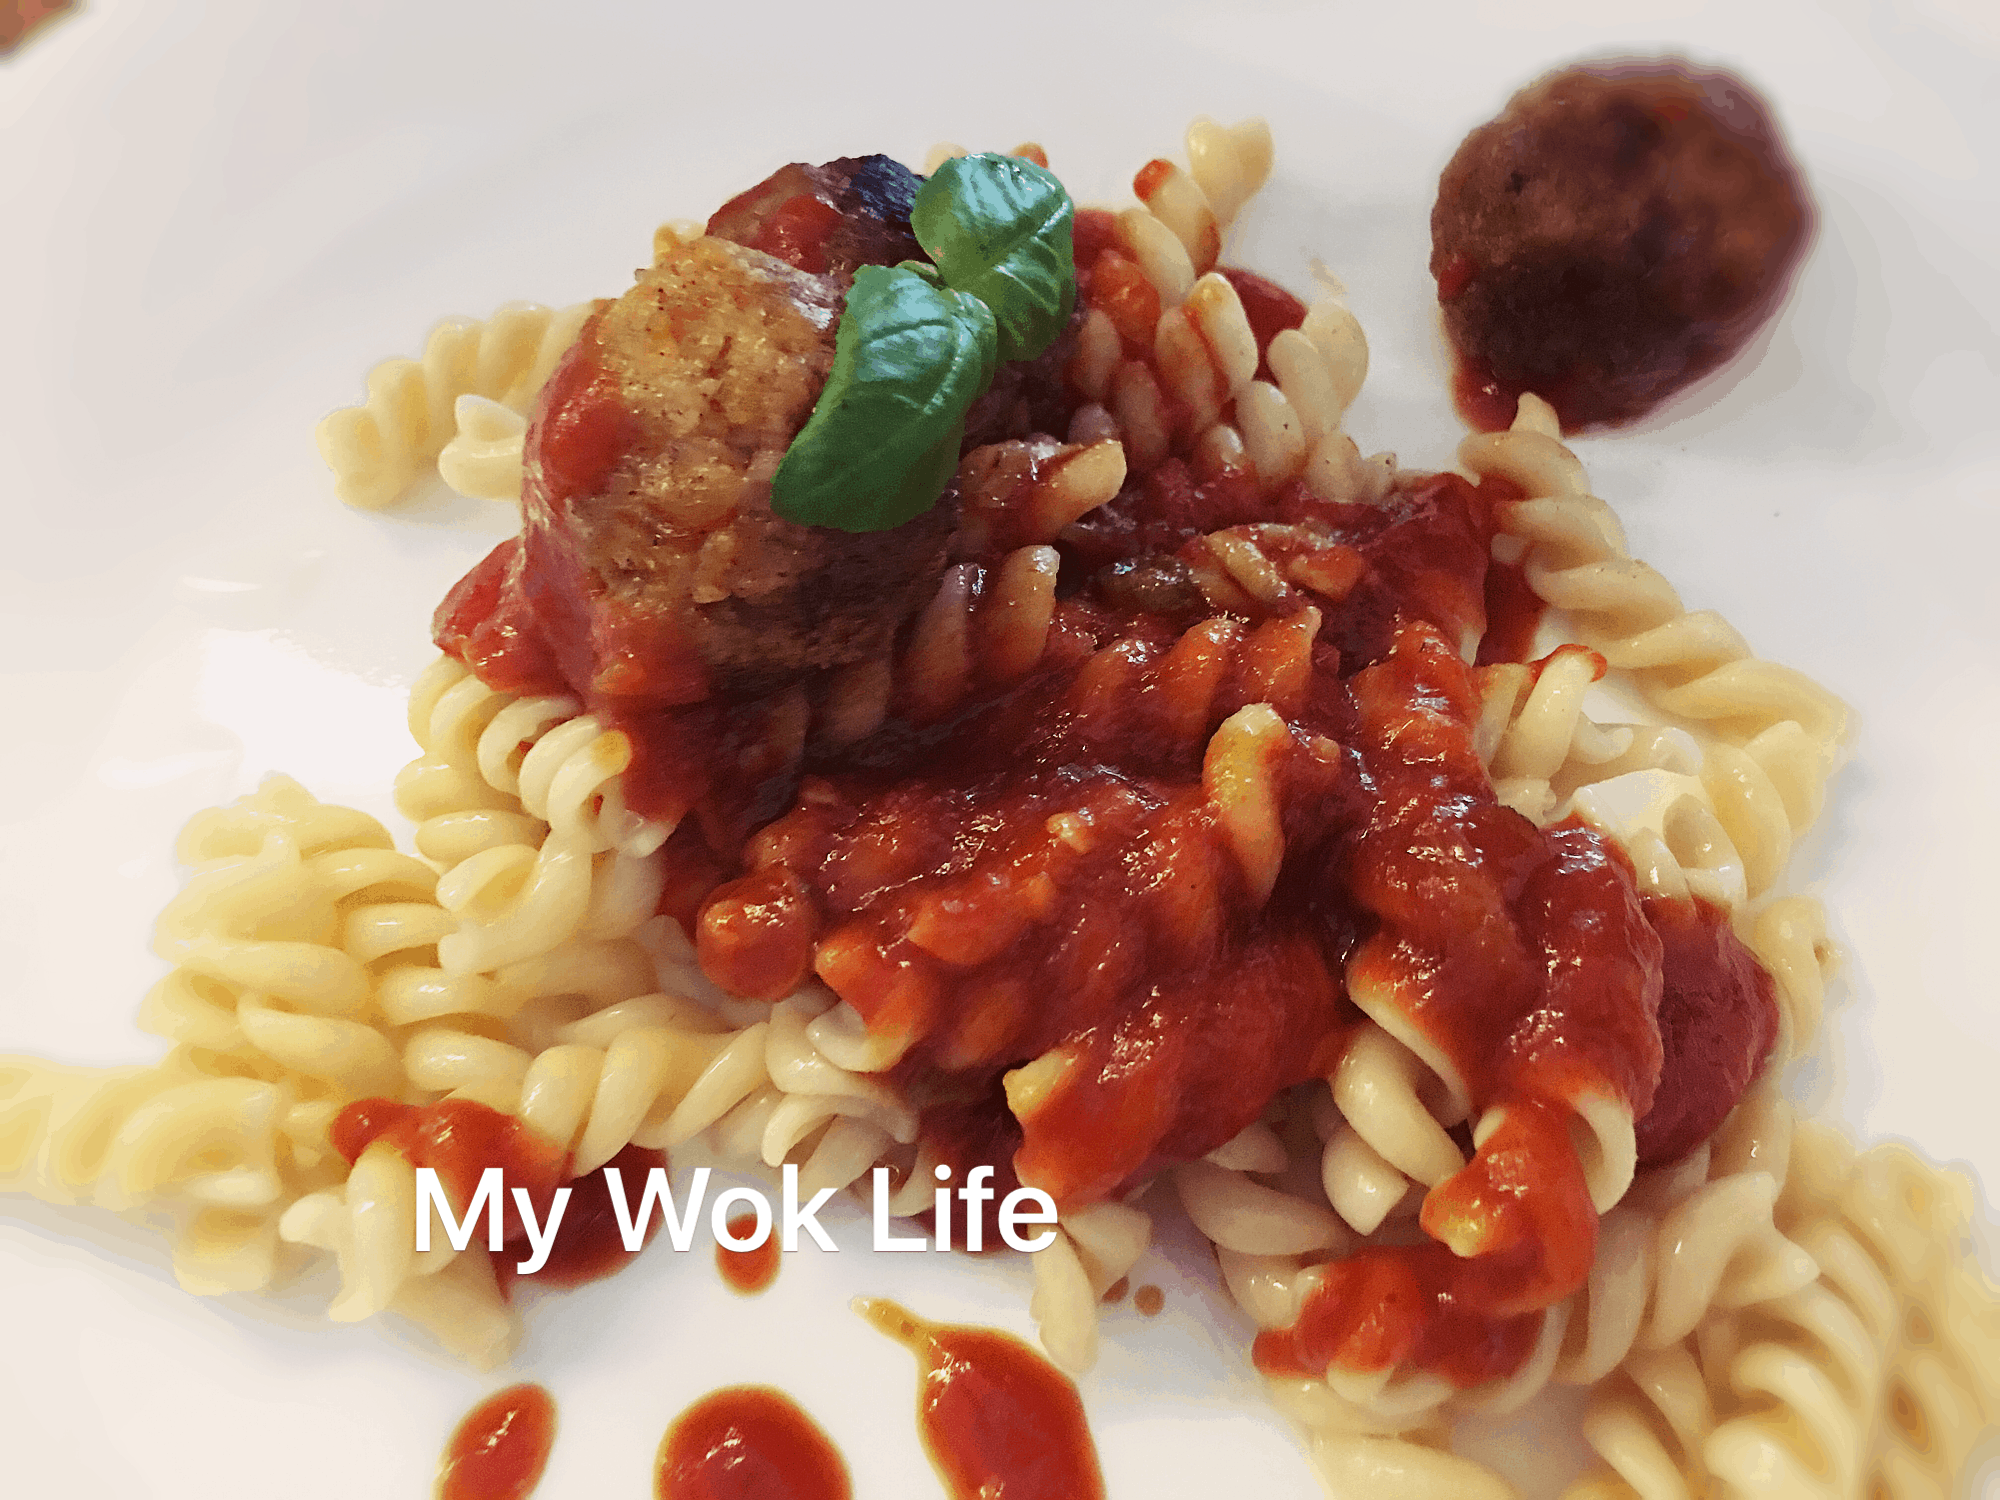 My Wok Life Cooking Blog - Spicy Tomato Pasta with Tuna (Pork) Meatballs -